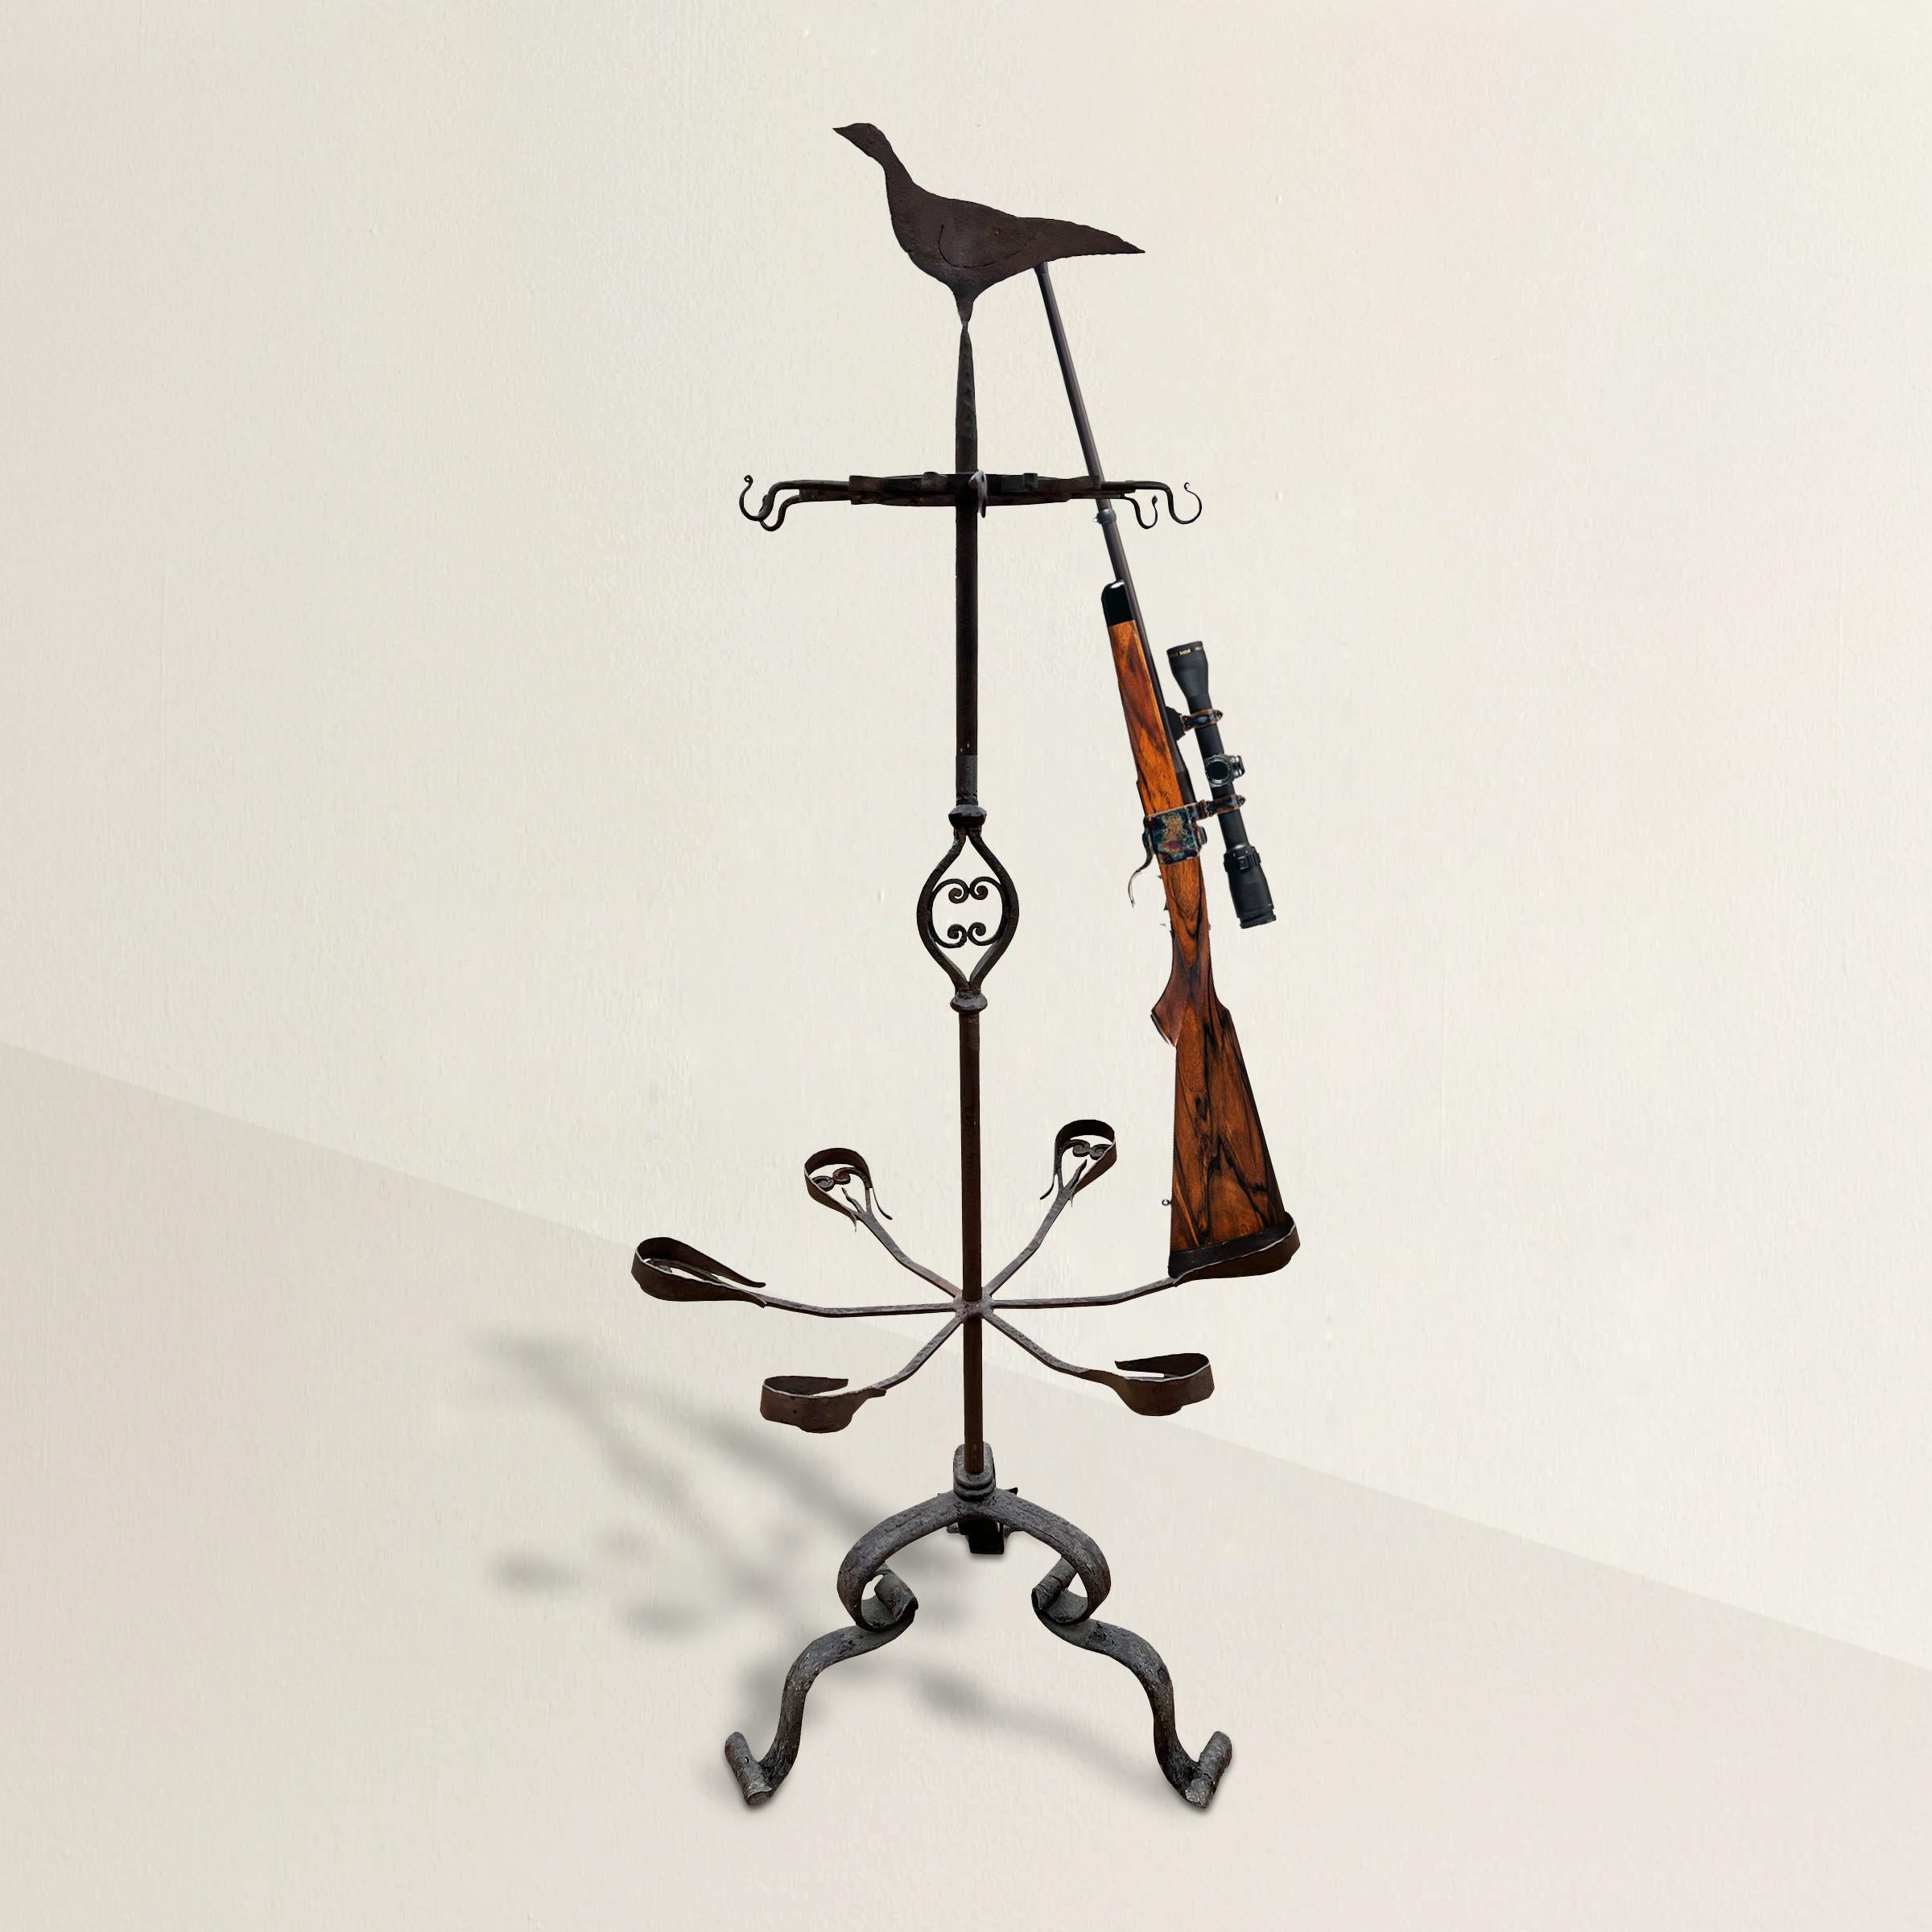 An incredible and rare 18th century Belgian wrought-iron gun rack from a hunting lodge in Southern Belgium designed for use at hunting parties. A silhouetted game-bird sits on the top. The rack has six arms to cradle the stocks, and clips near the